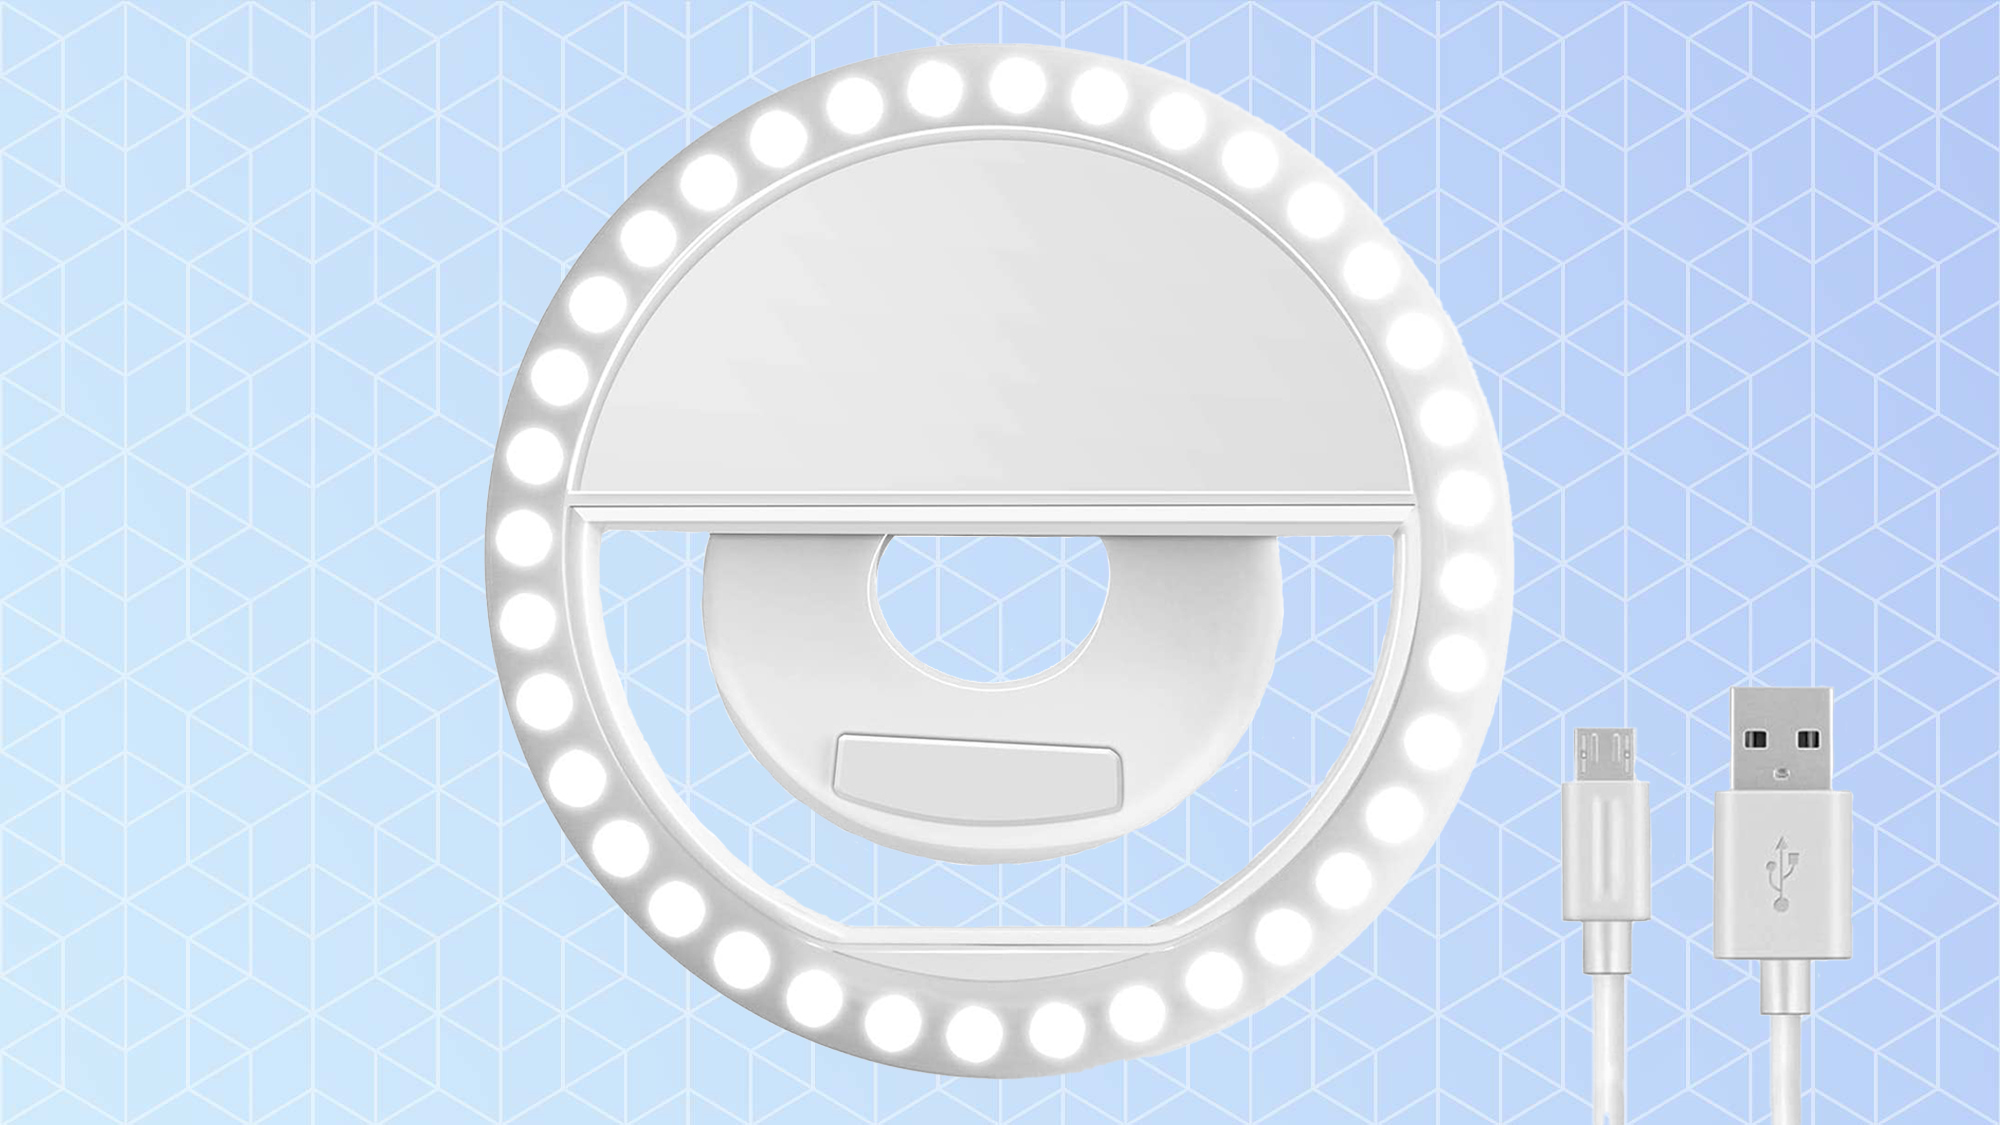 The XINBAOHONG Rechargeable Portable Clip-on Selfie Ring Light on a blue background